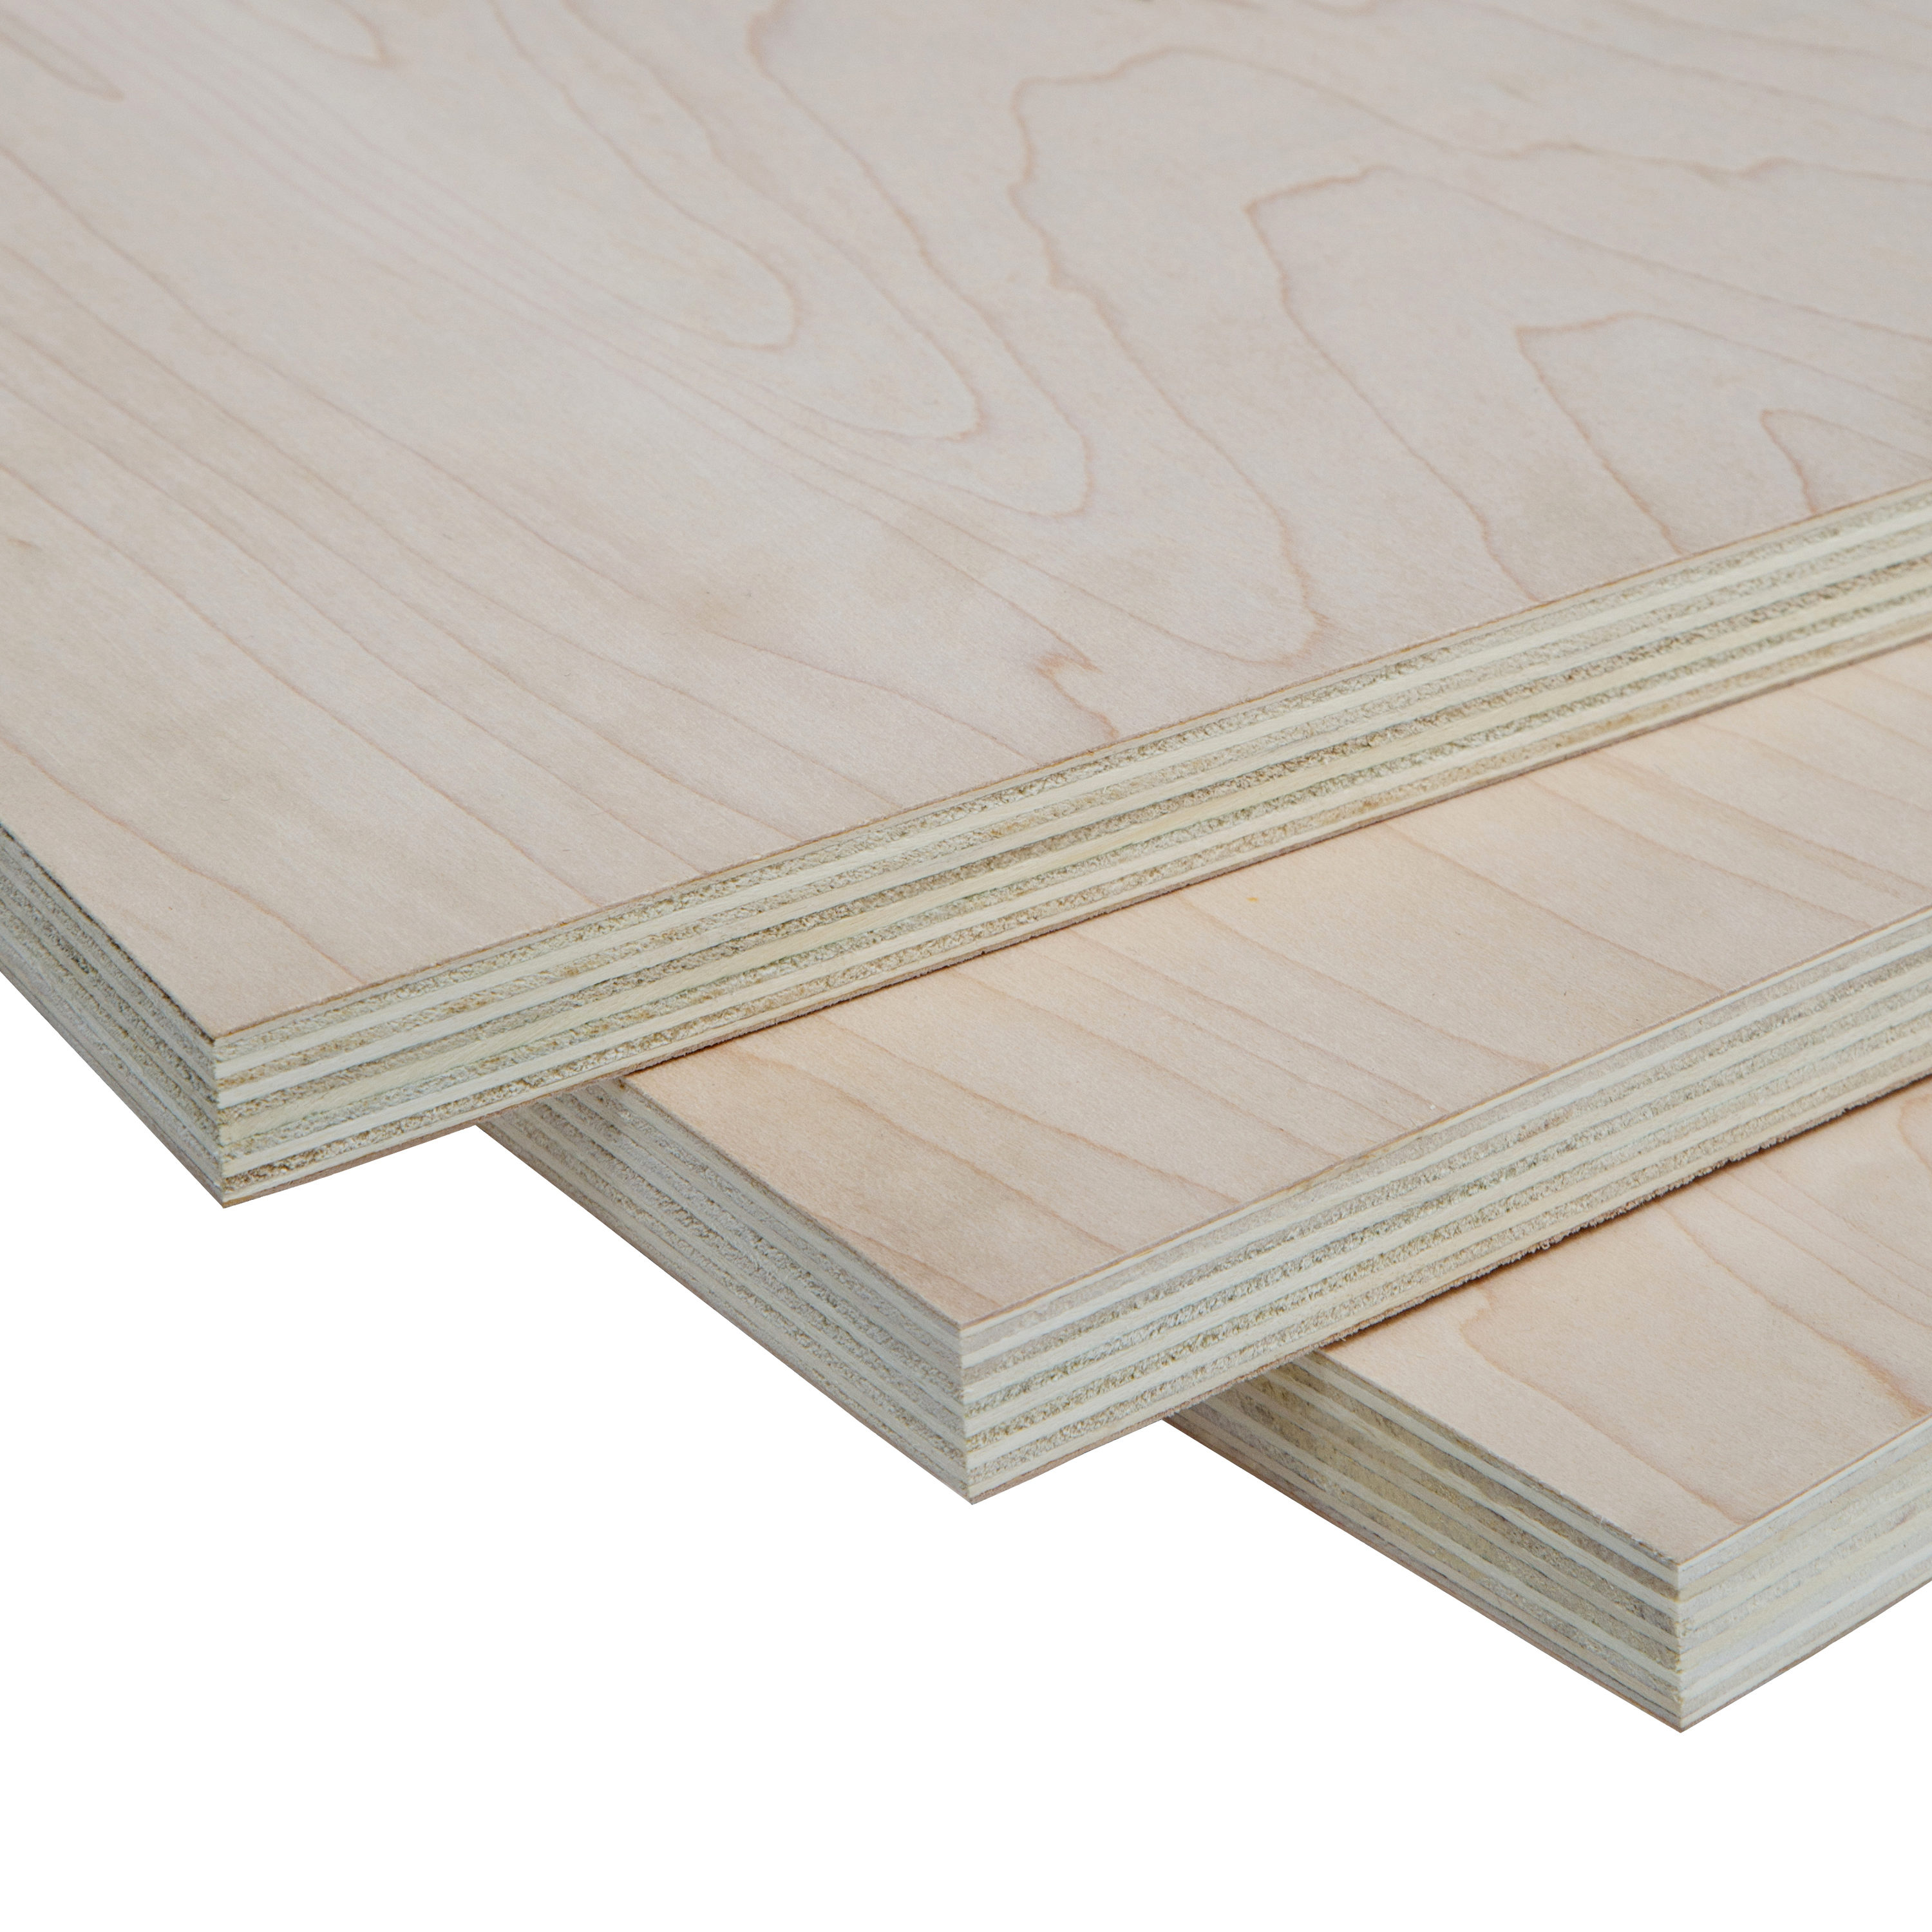 Maple Plywood 4 ft x 8 ft (Imported Plywood)